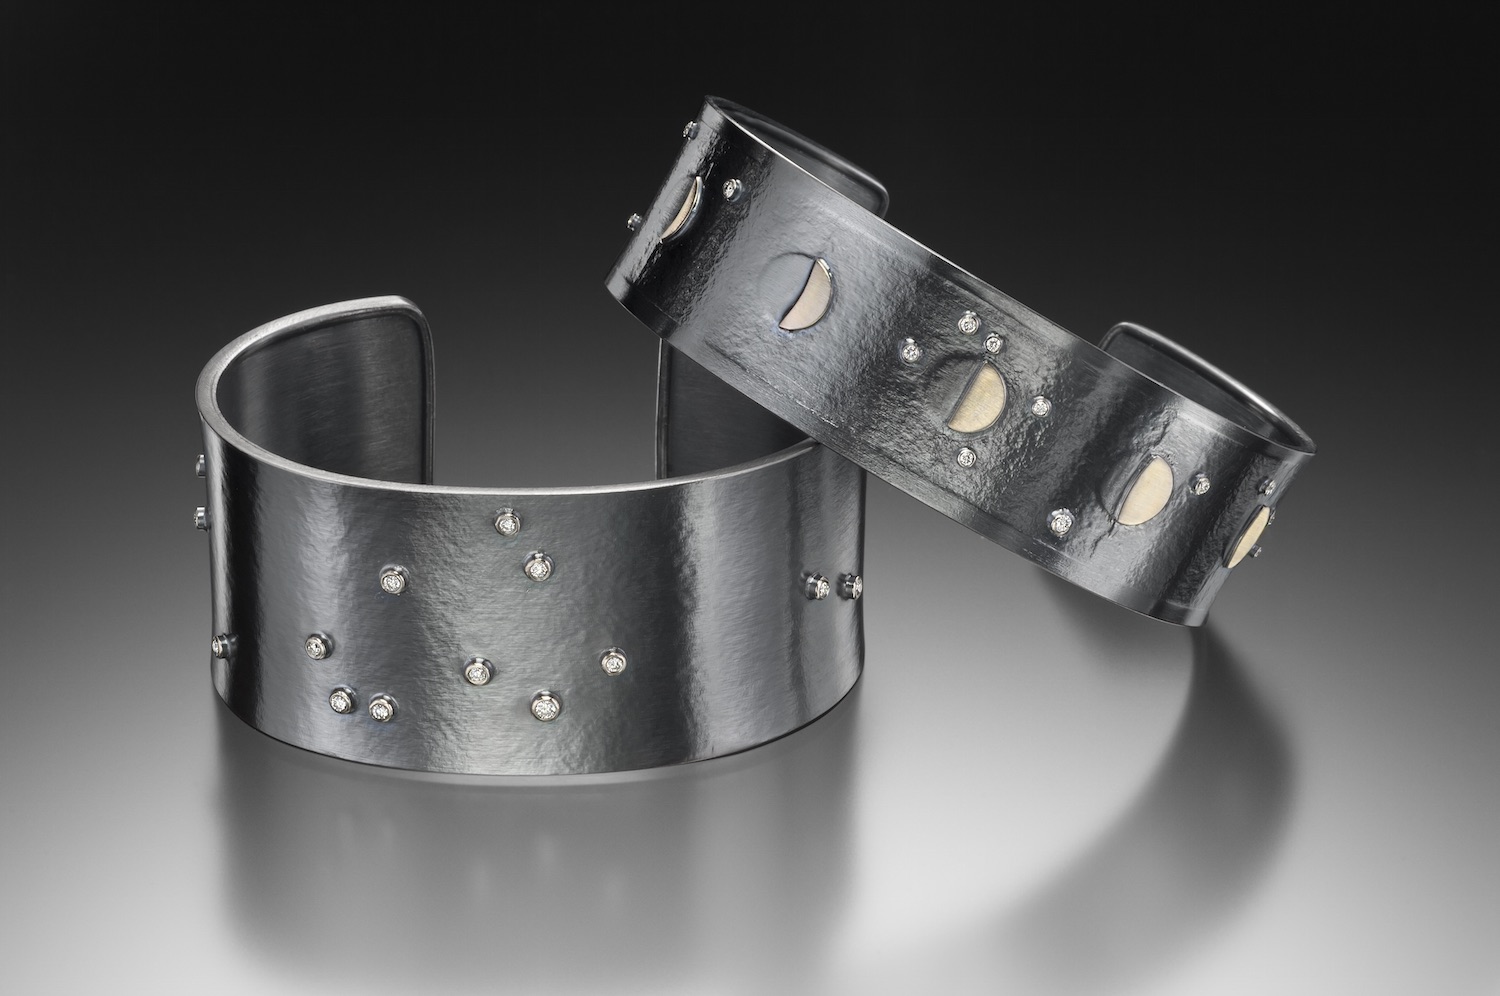 Star Map Cuff and Simple Moon Phases Cuff with Diamonds